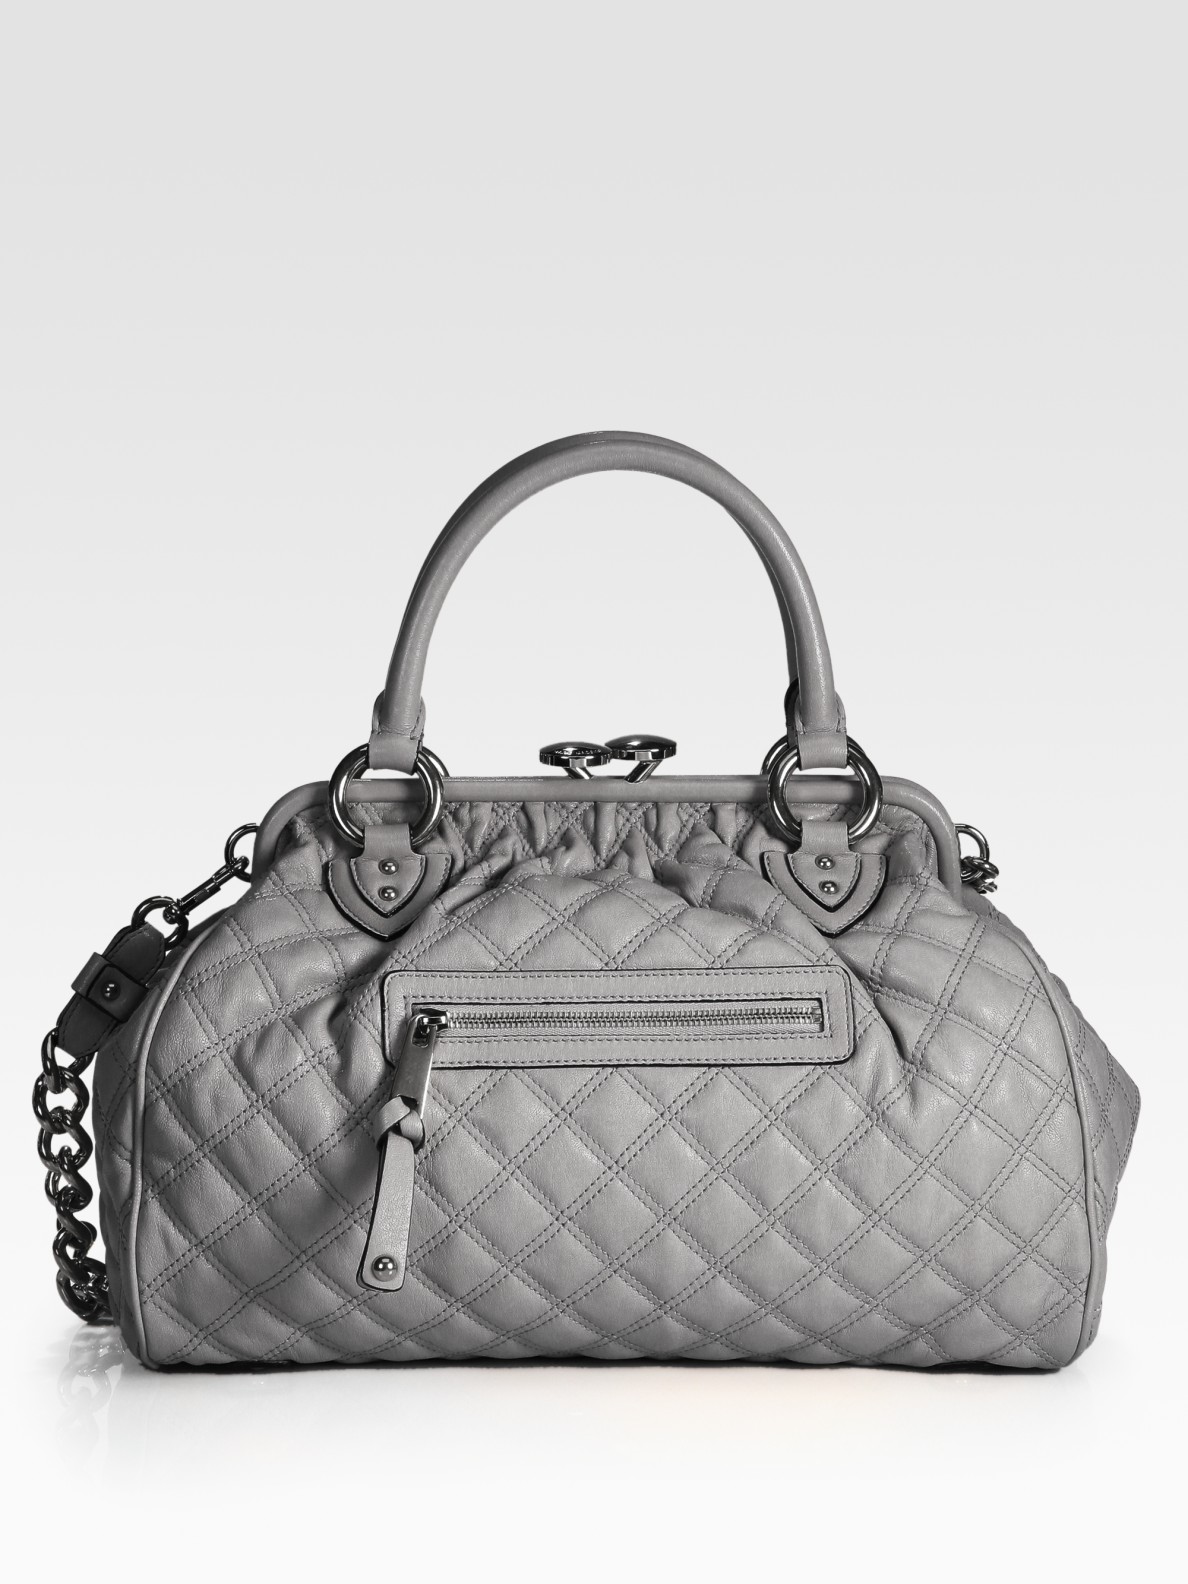 Marc Jacobs Classic Quilted Leather Stam Bag in Grey (Gray) - Lyst